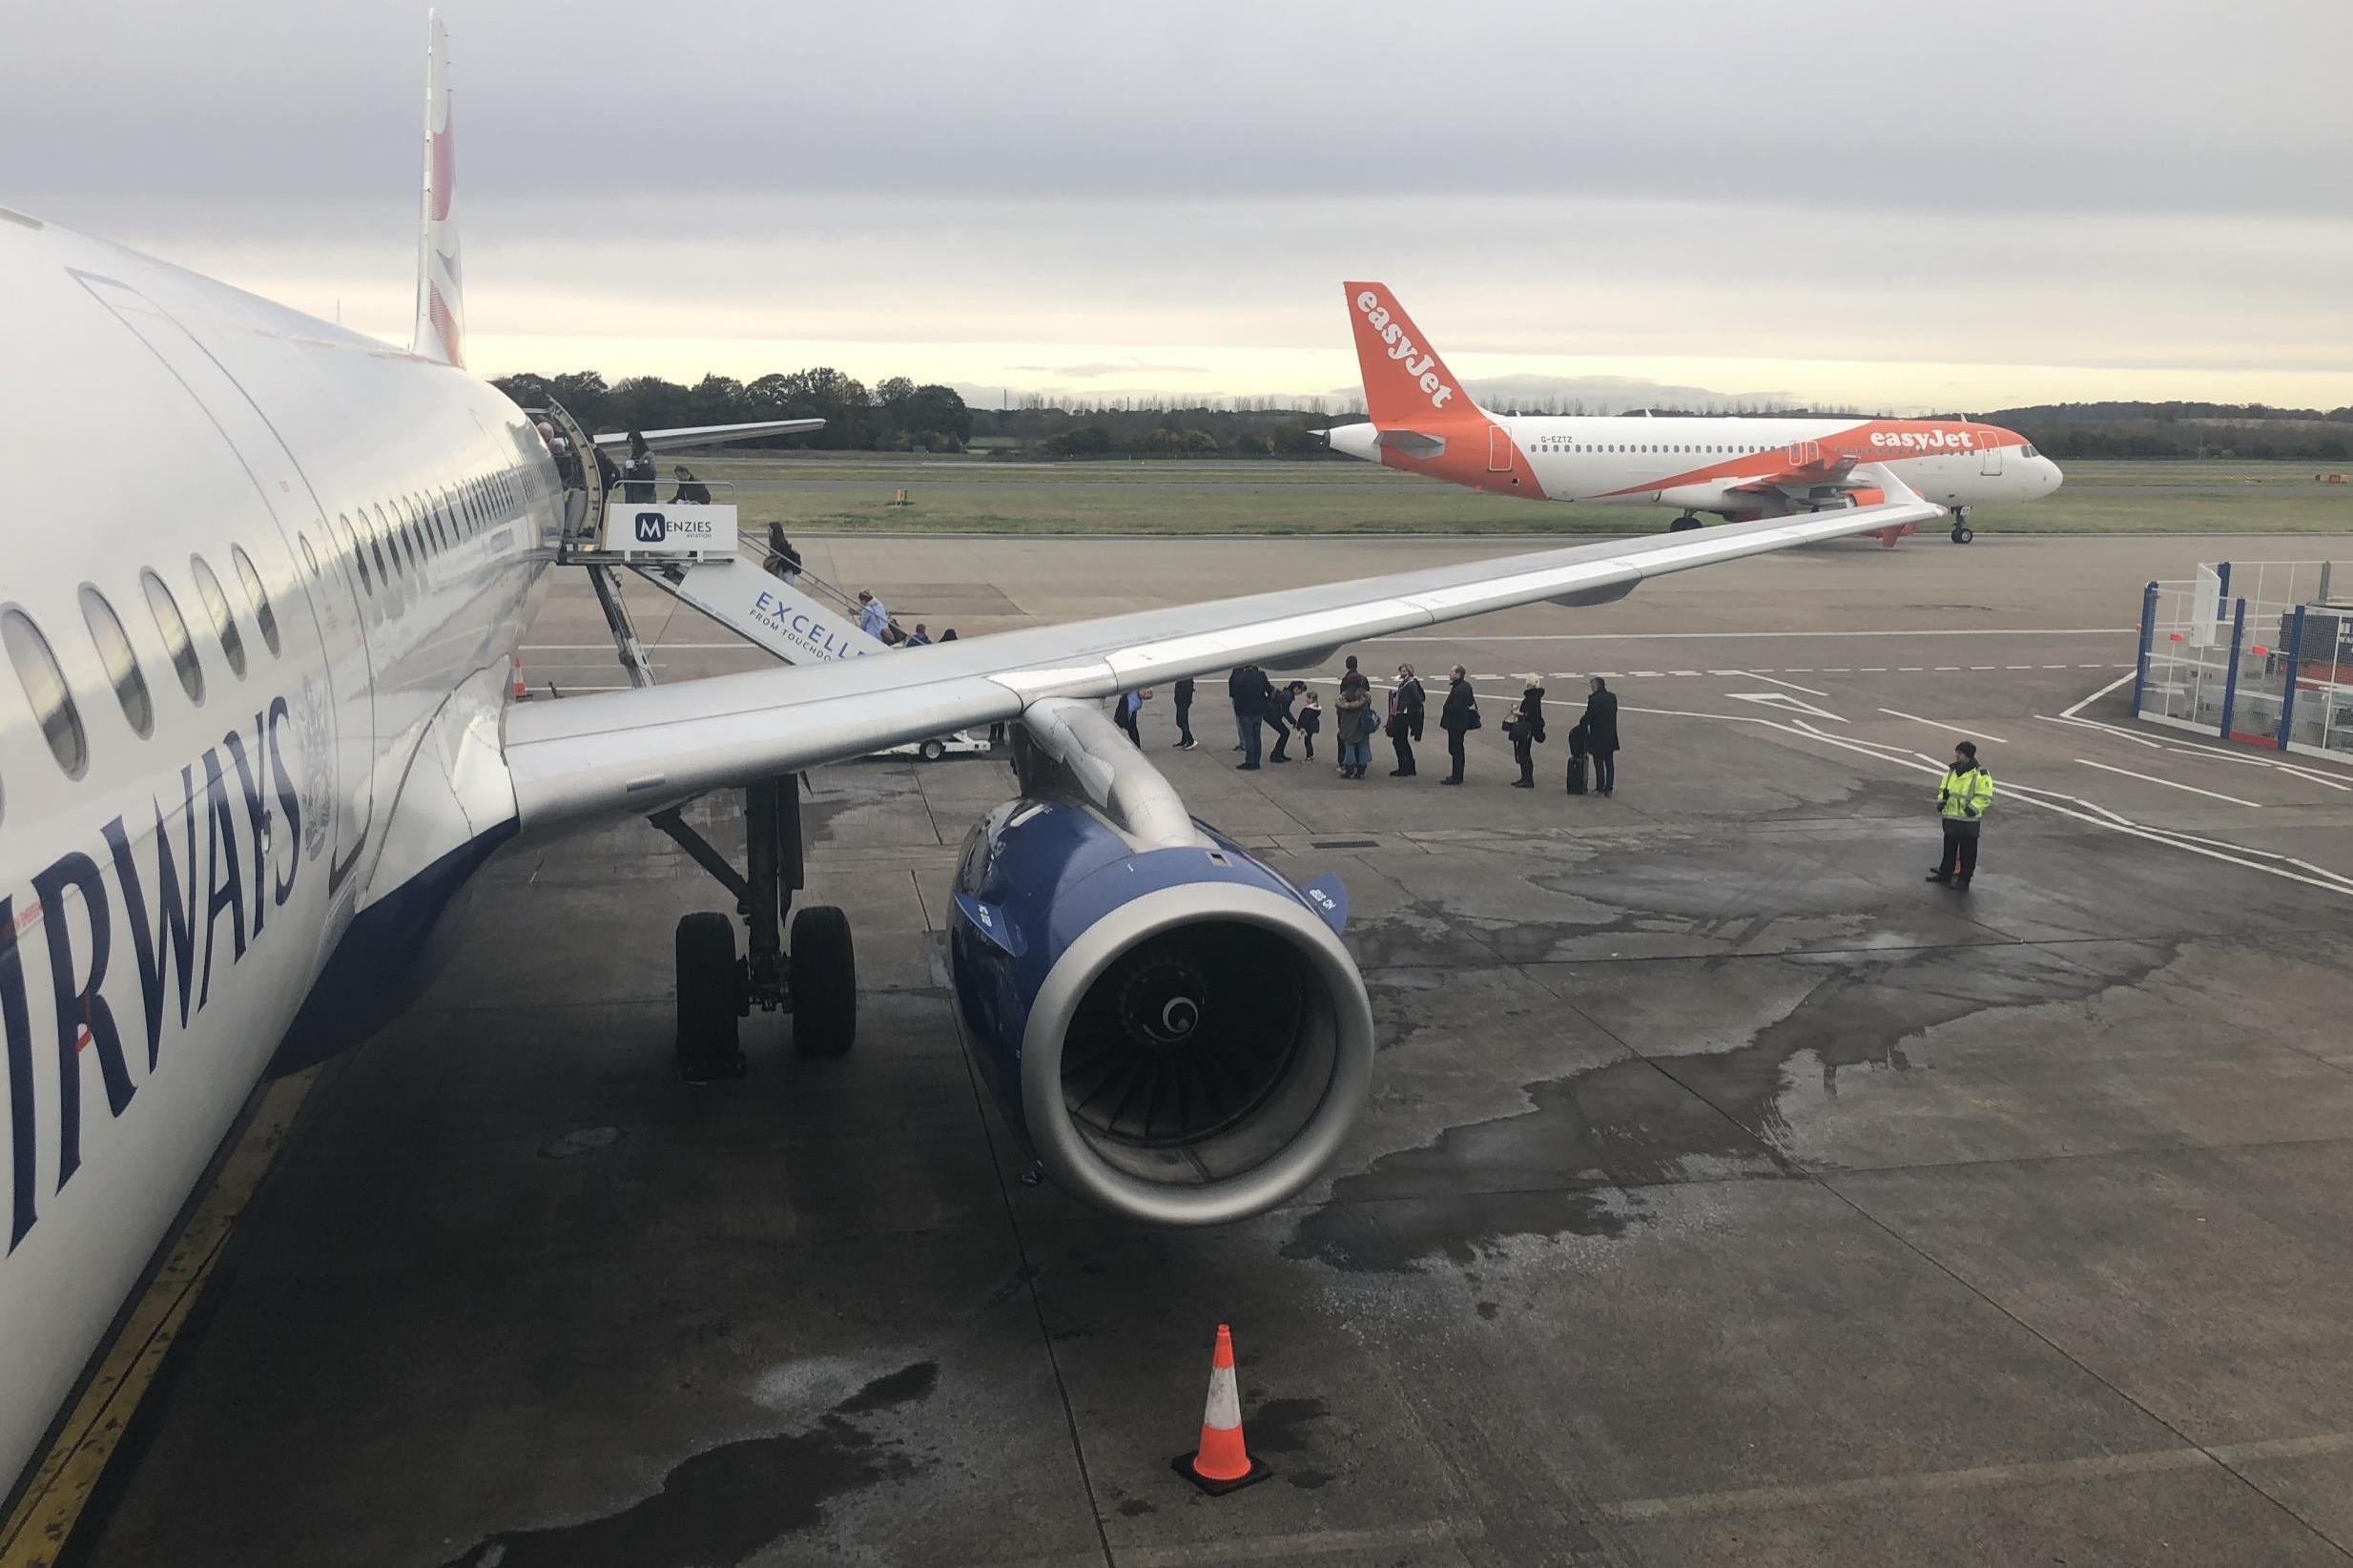 Summer boost: despite strikes and competition from airlines such as easyJet, BA's parent company made an average of £37 per passenger from July to September